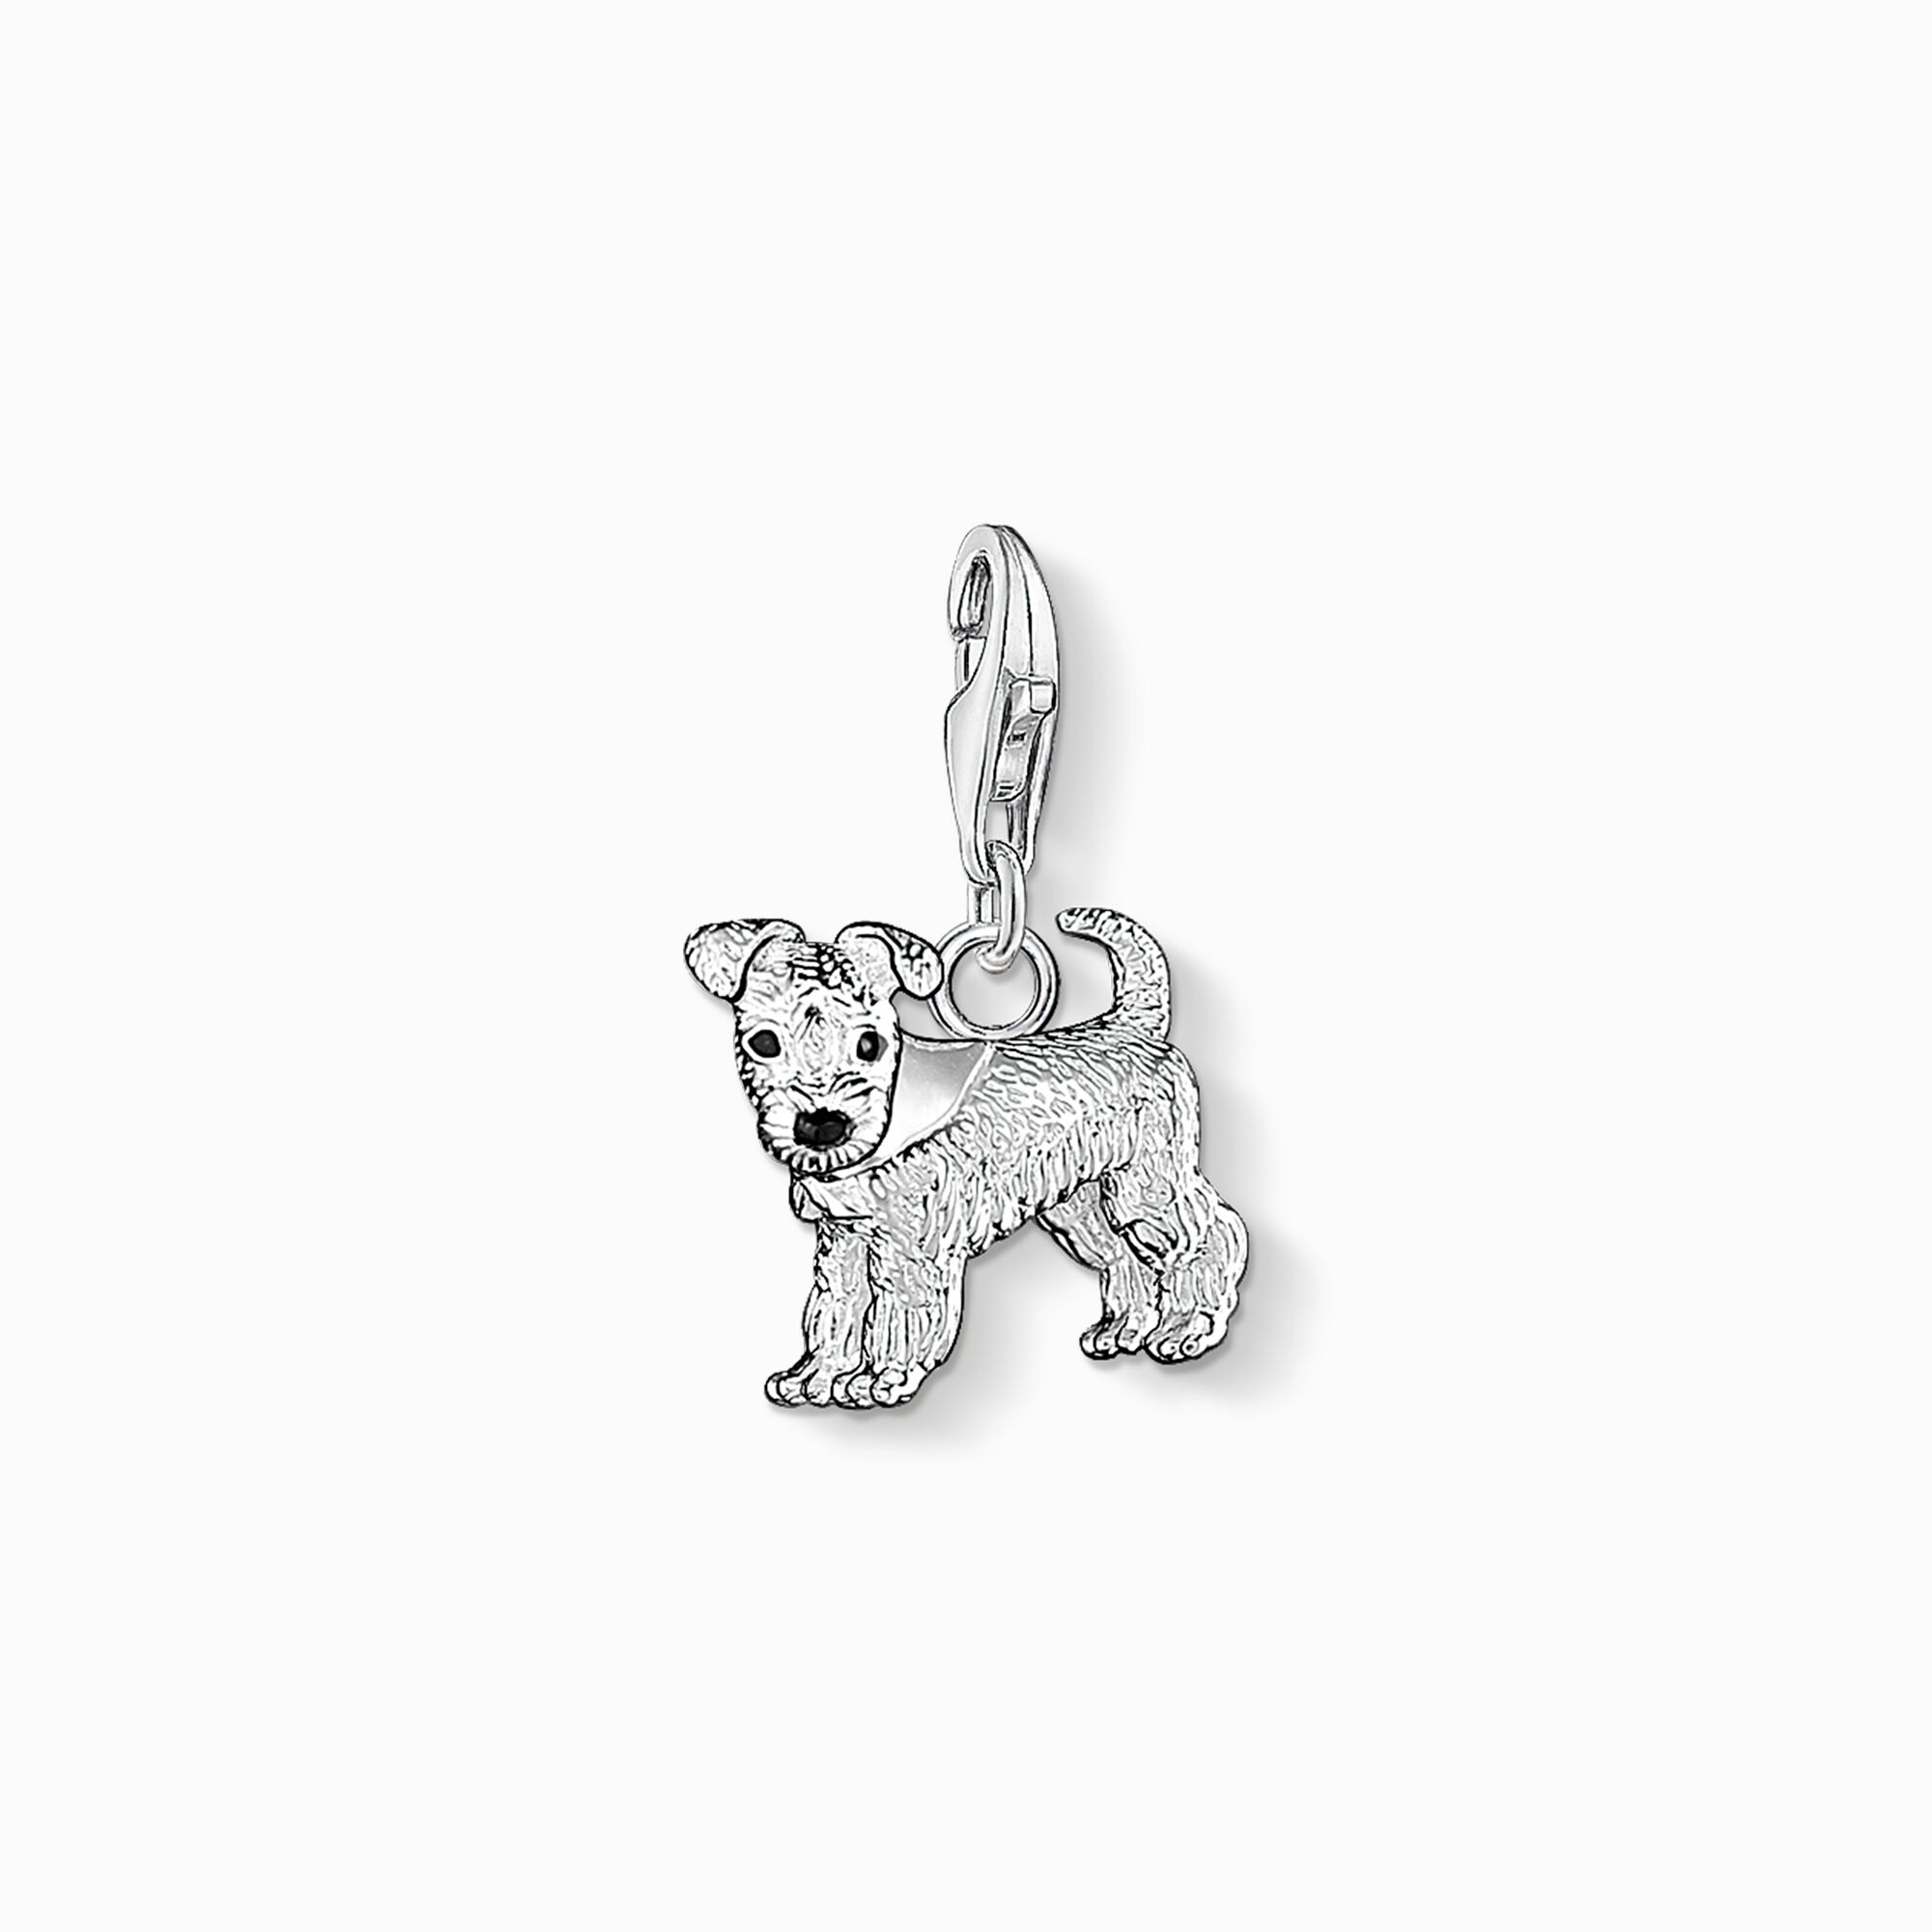 Charm pendant dog from the Charm Club collection in the THOMAS SABO online store